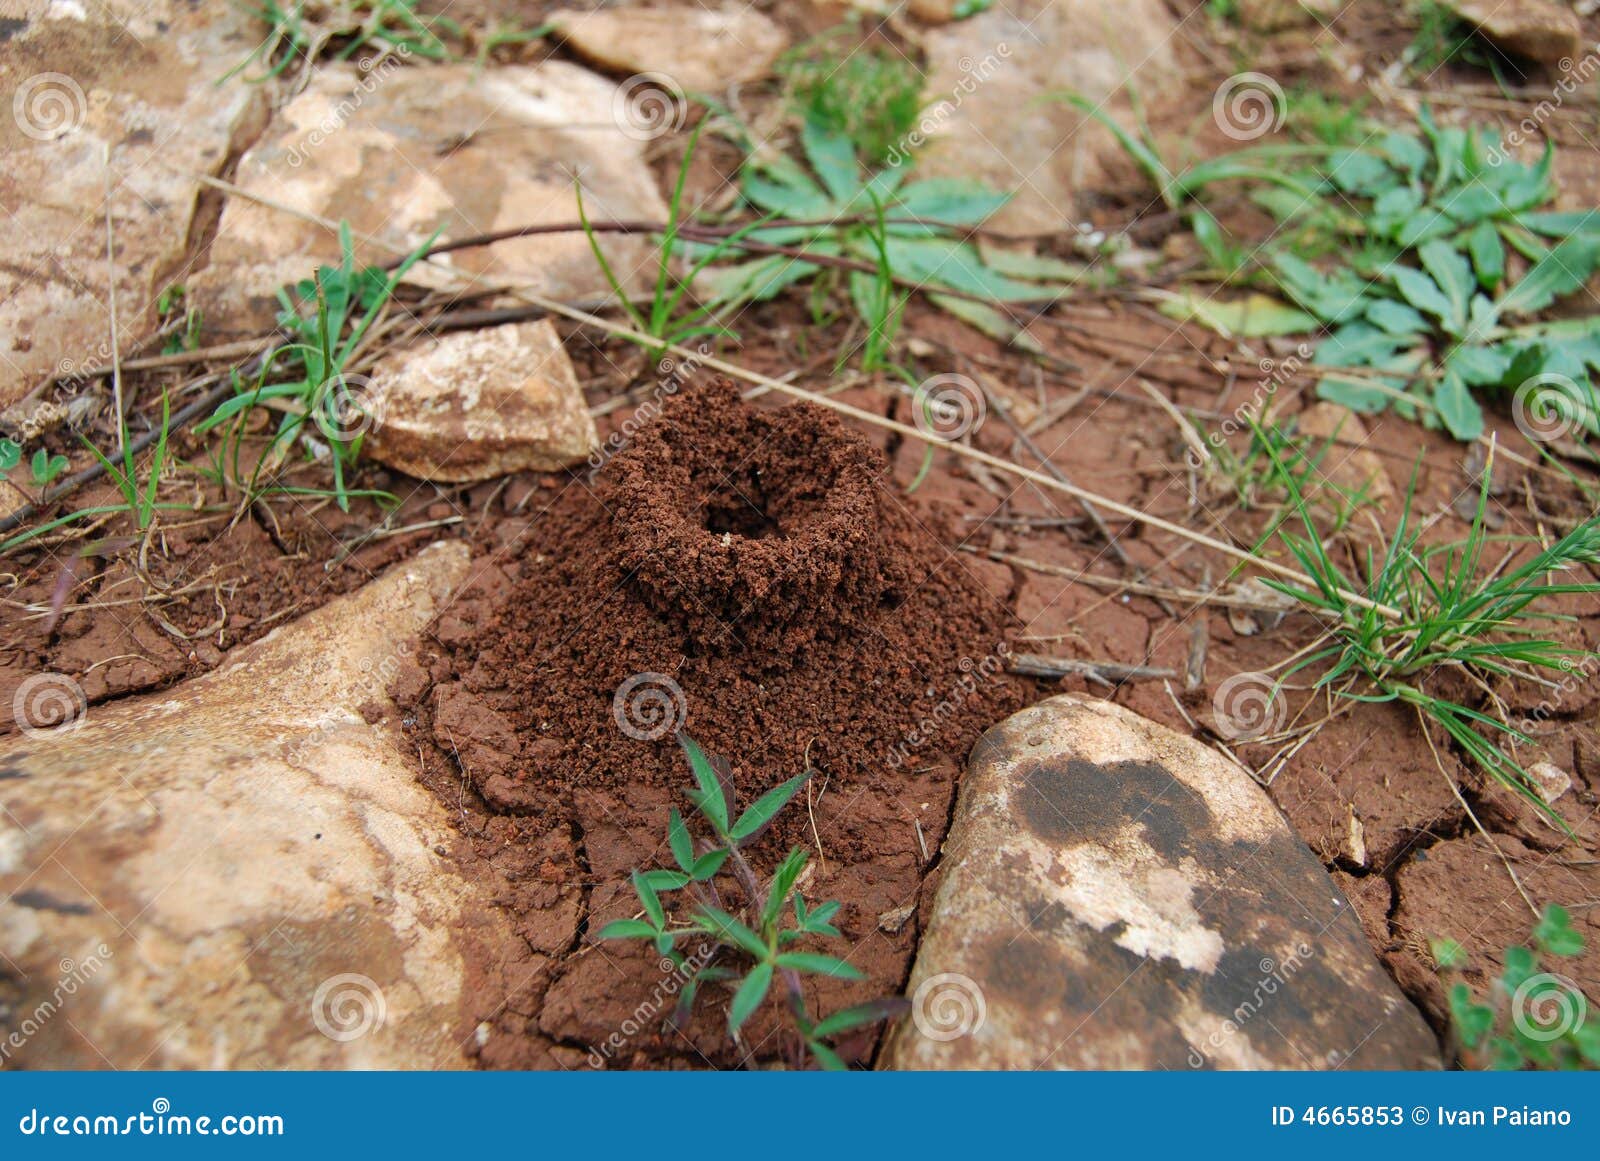 anthill, ant house